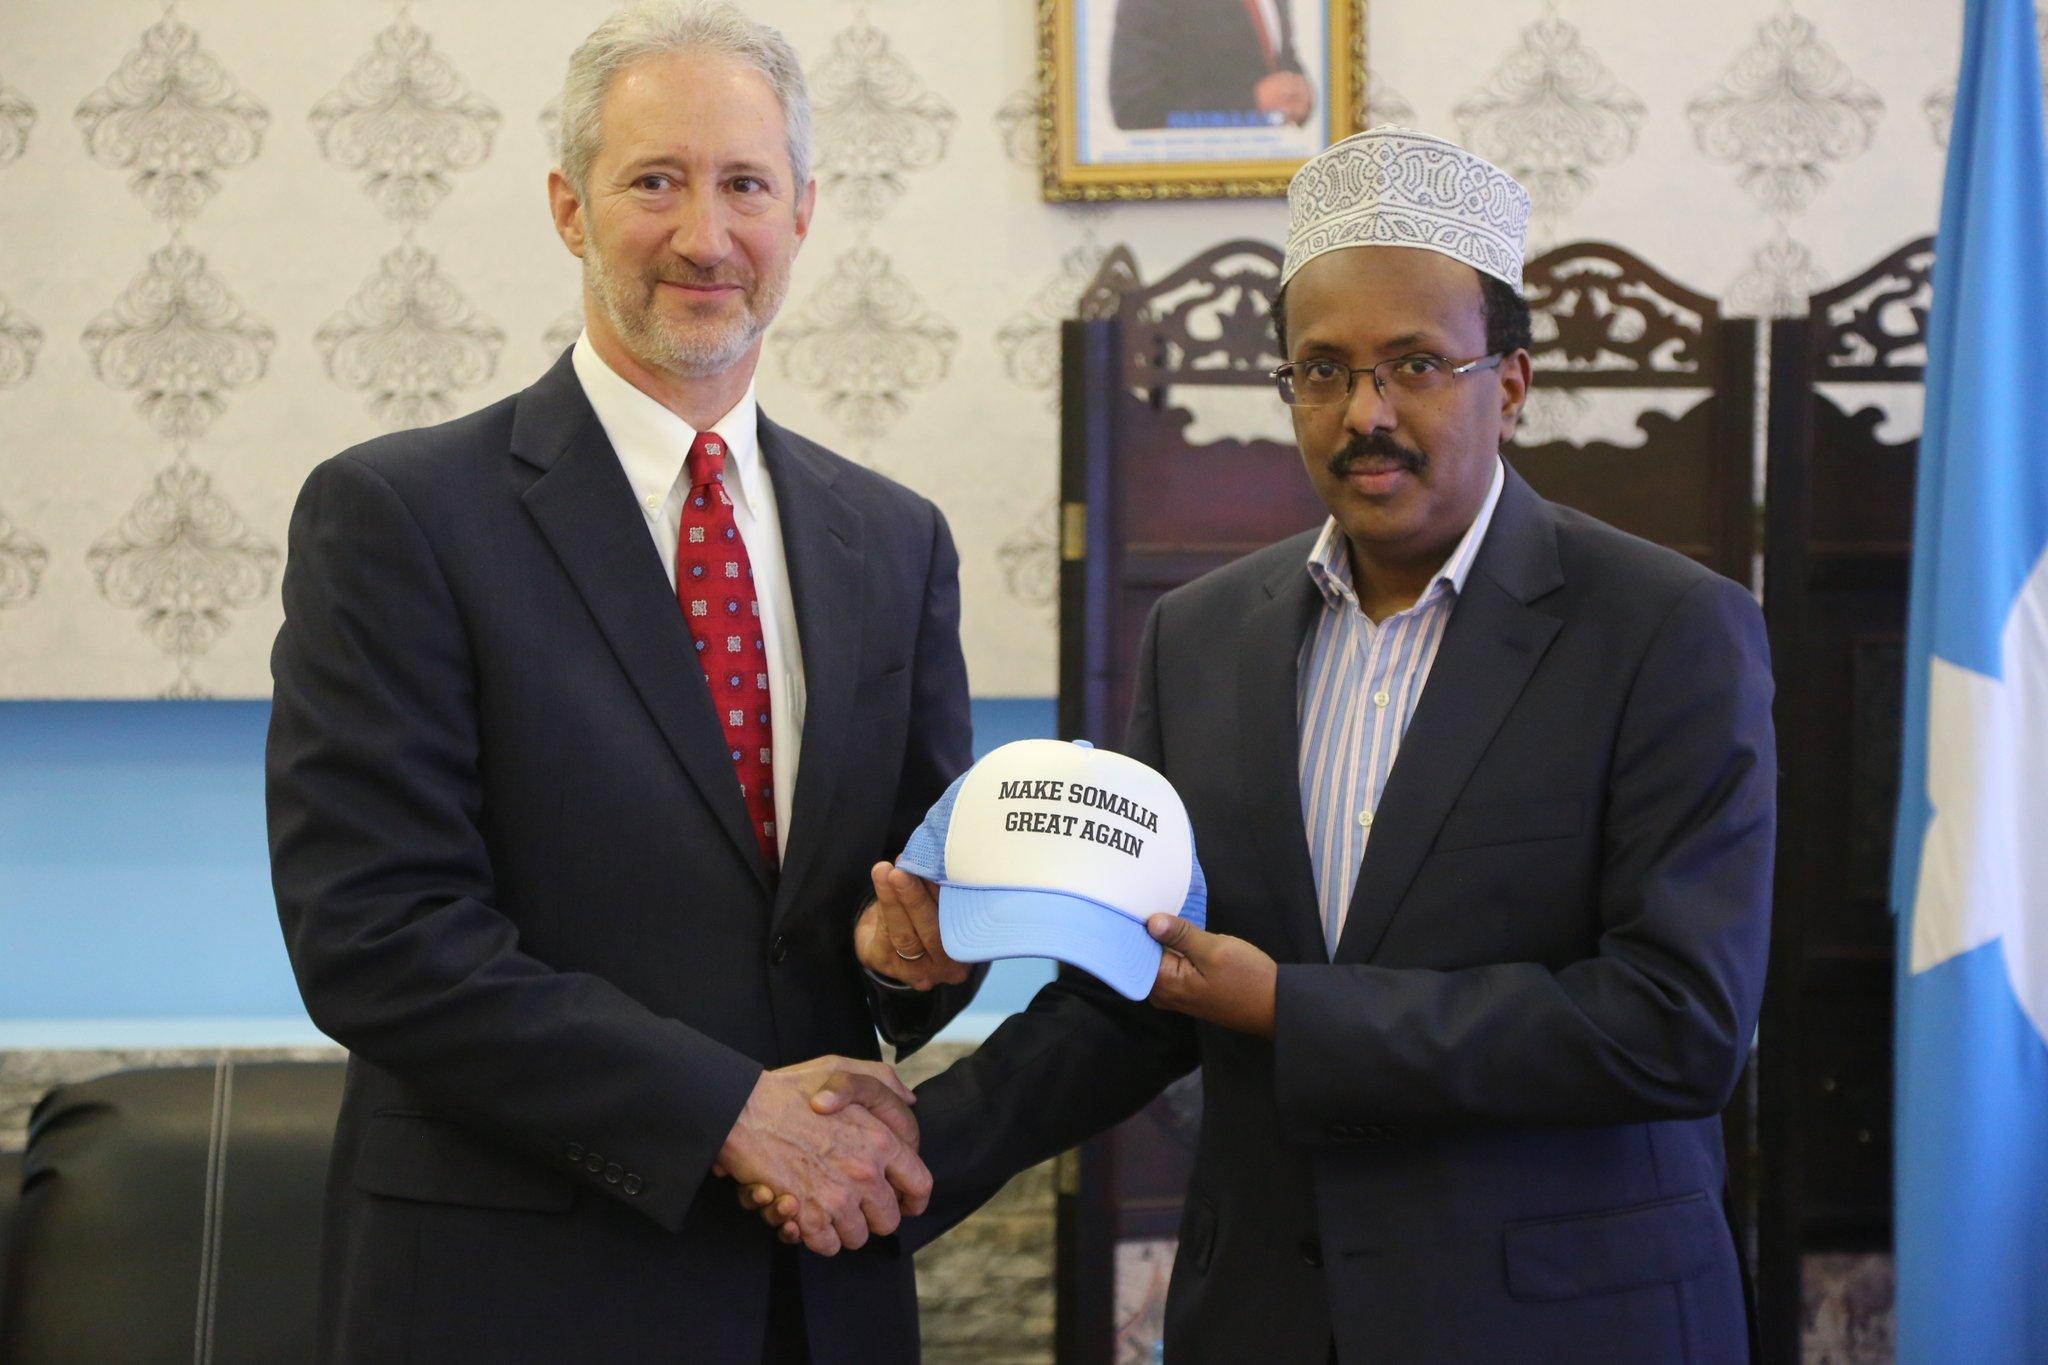 Ambassador Stephen Schwartz hands over the cap to the newly elected Somali President Mohamed Abdullahi, known as Farmajo